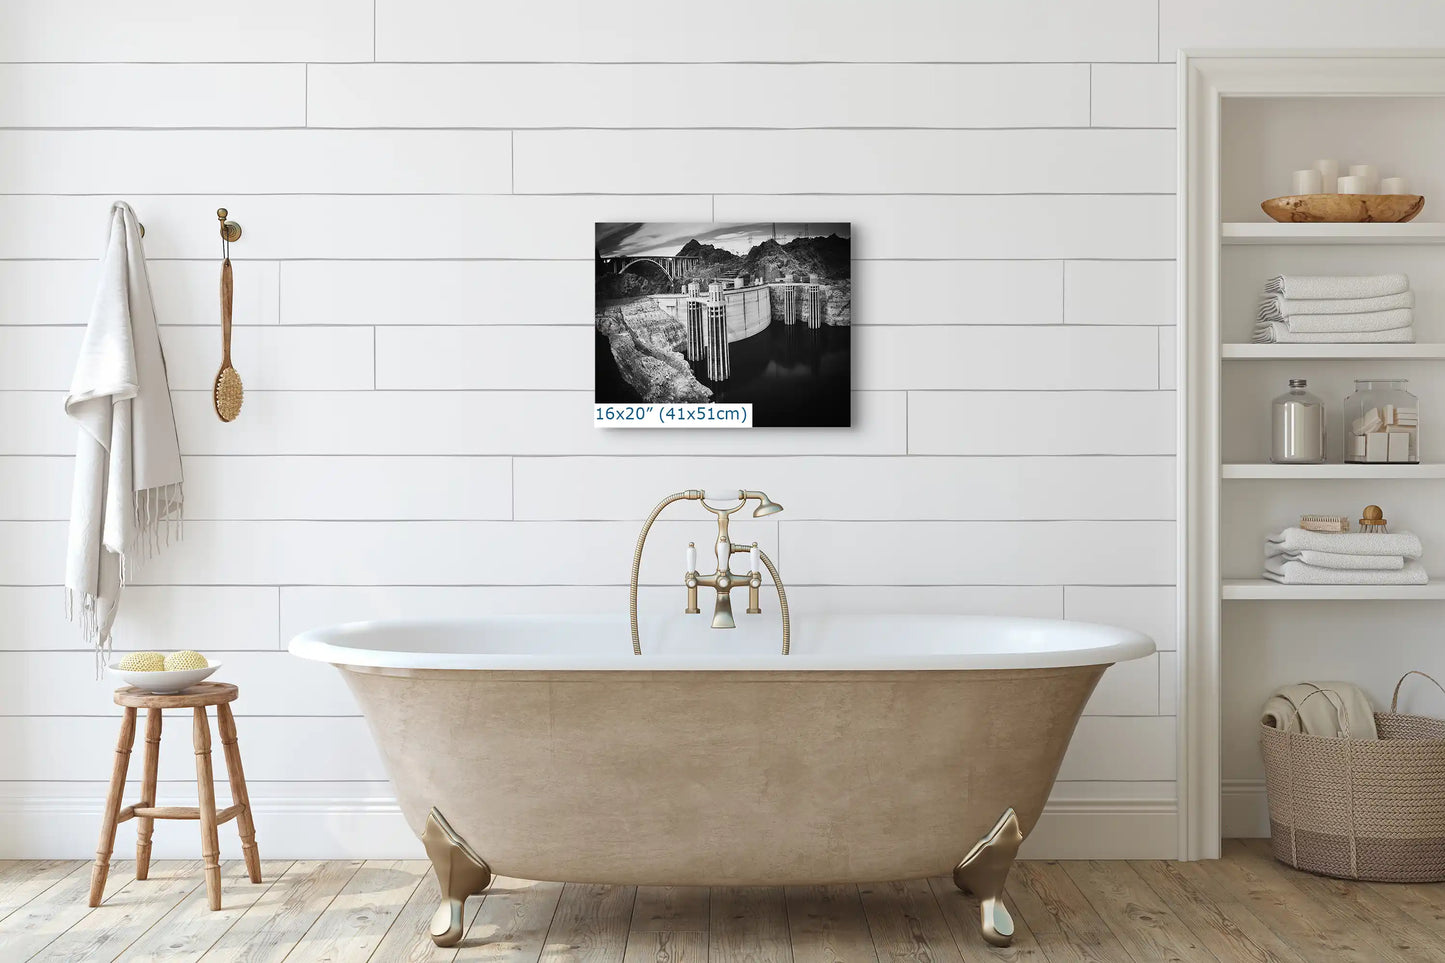 A 16x20 black and white canvas print of Hoover Dam above a bathtub, merging historical engineering with modern home decor.